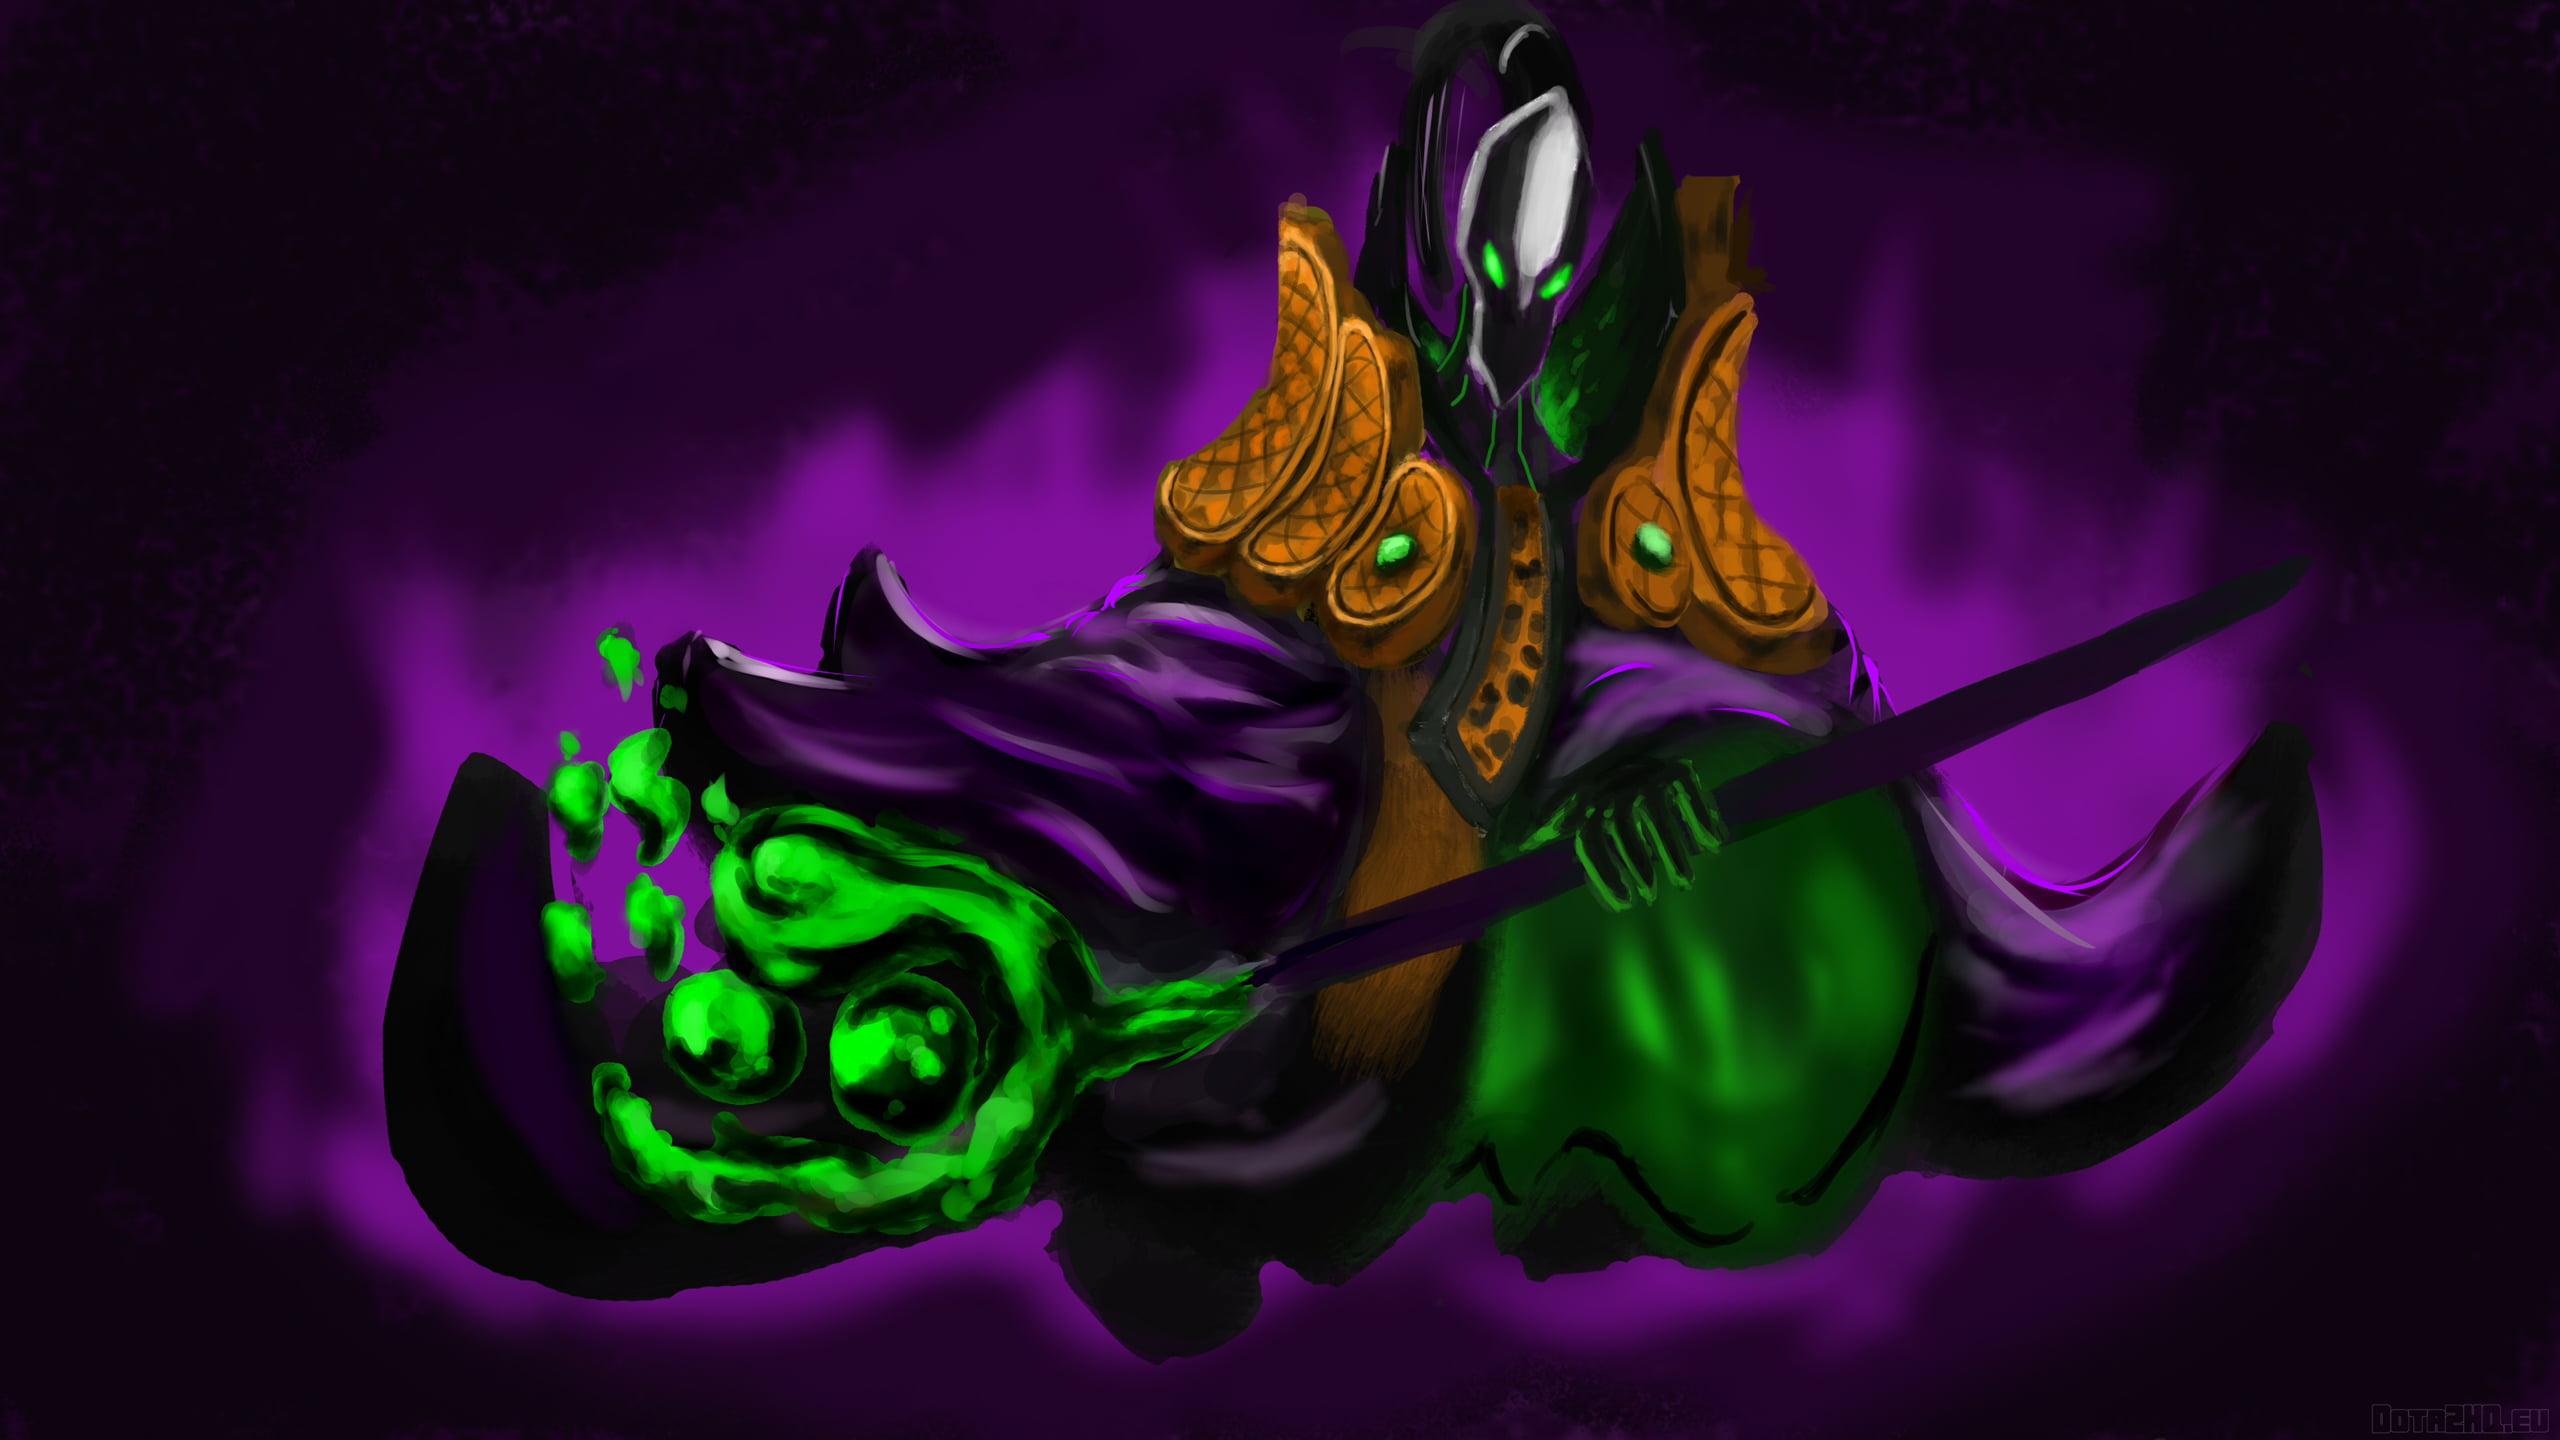 green and purple sorcerer character